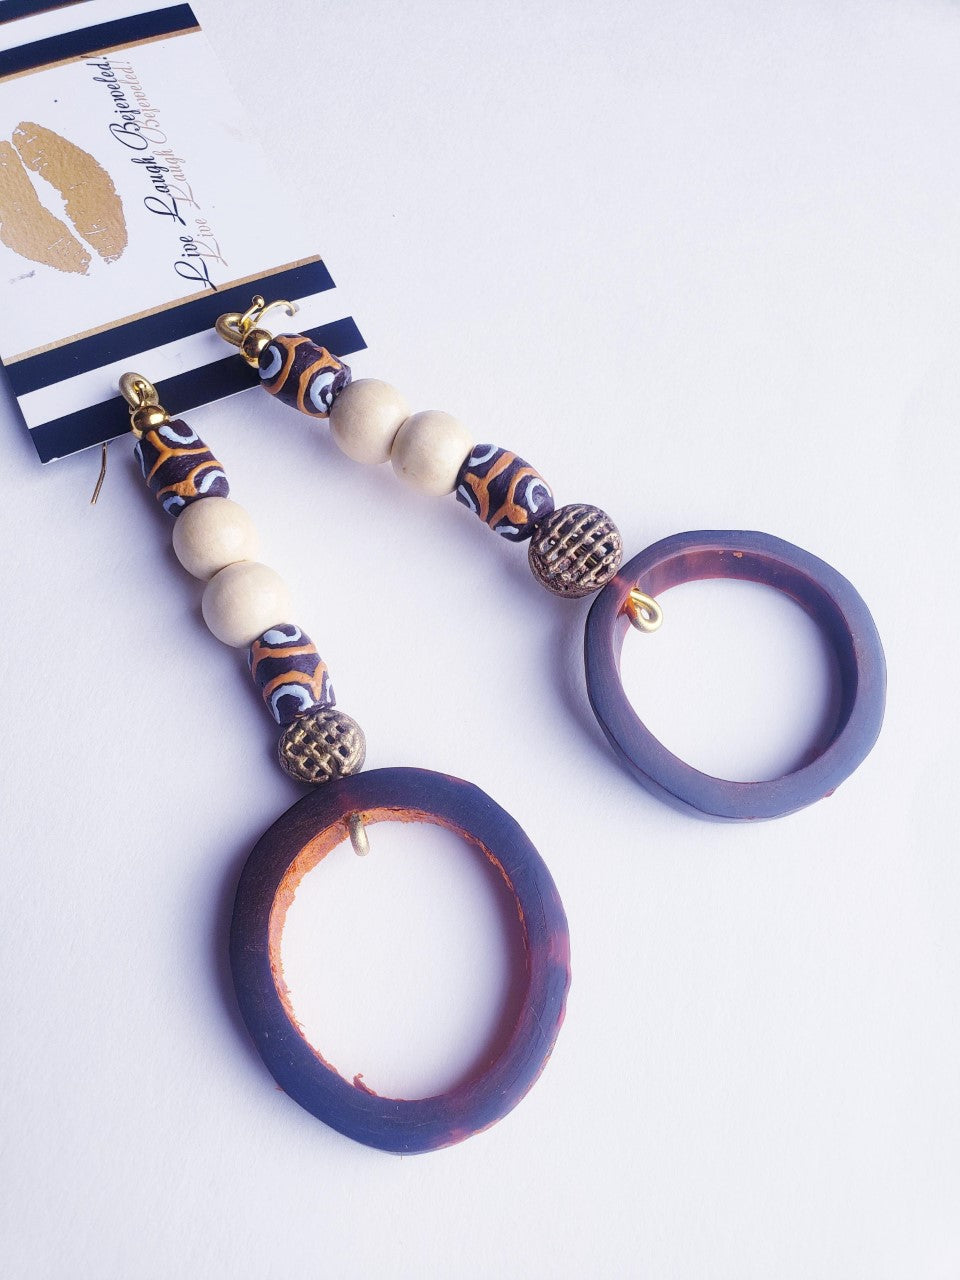 Bone + Wood + Ghanaian Recycled Glass Bead Earrings with Brass Accents